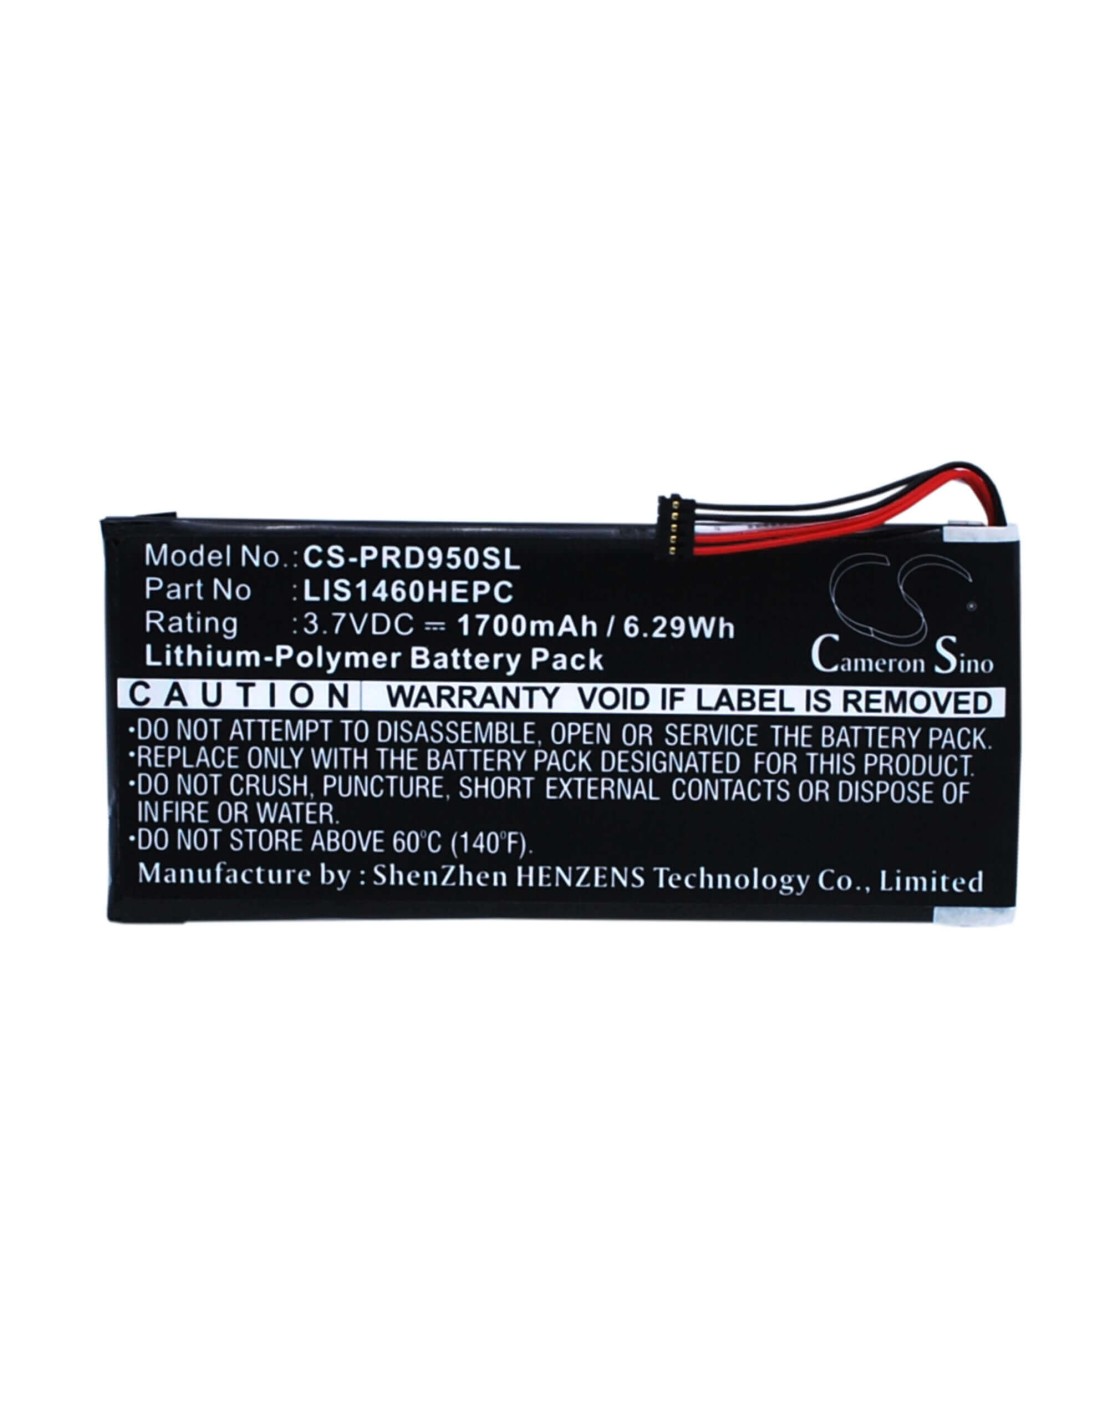 Battery for Sony Prs-950, Prs-950sc 3.7V, 1700mAh - 6.29Wh